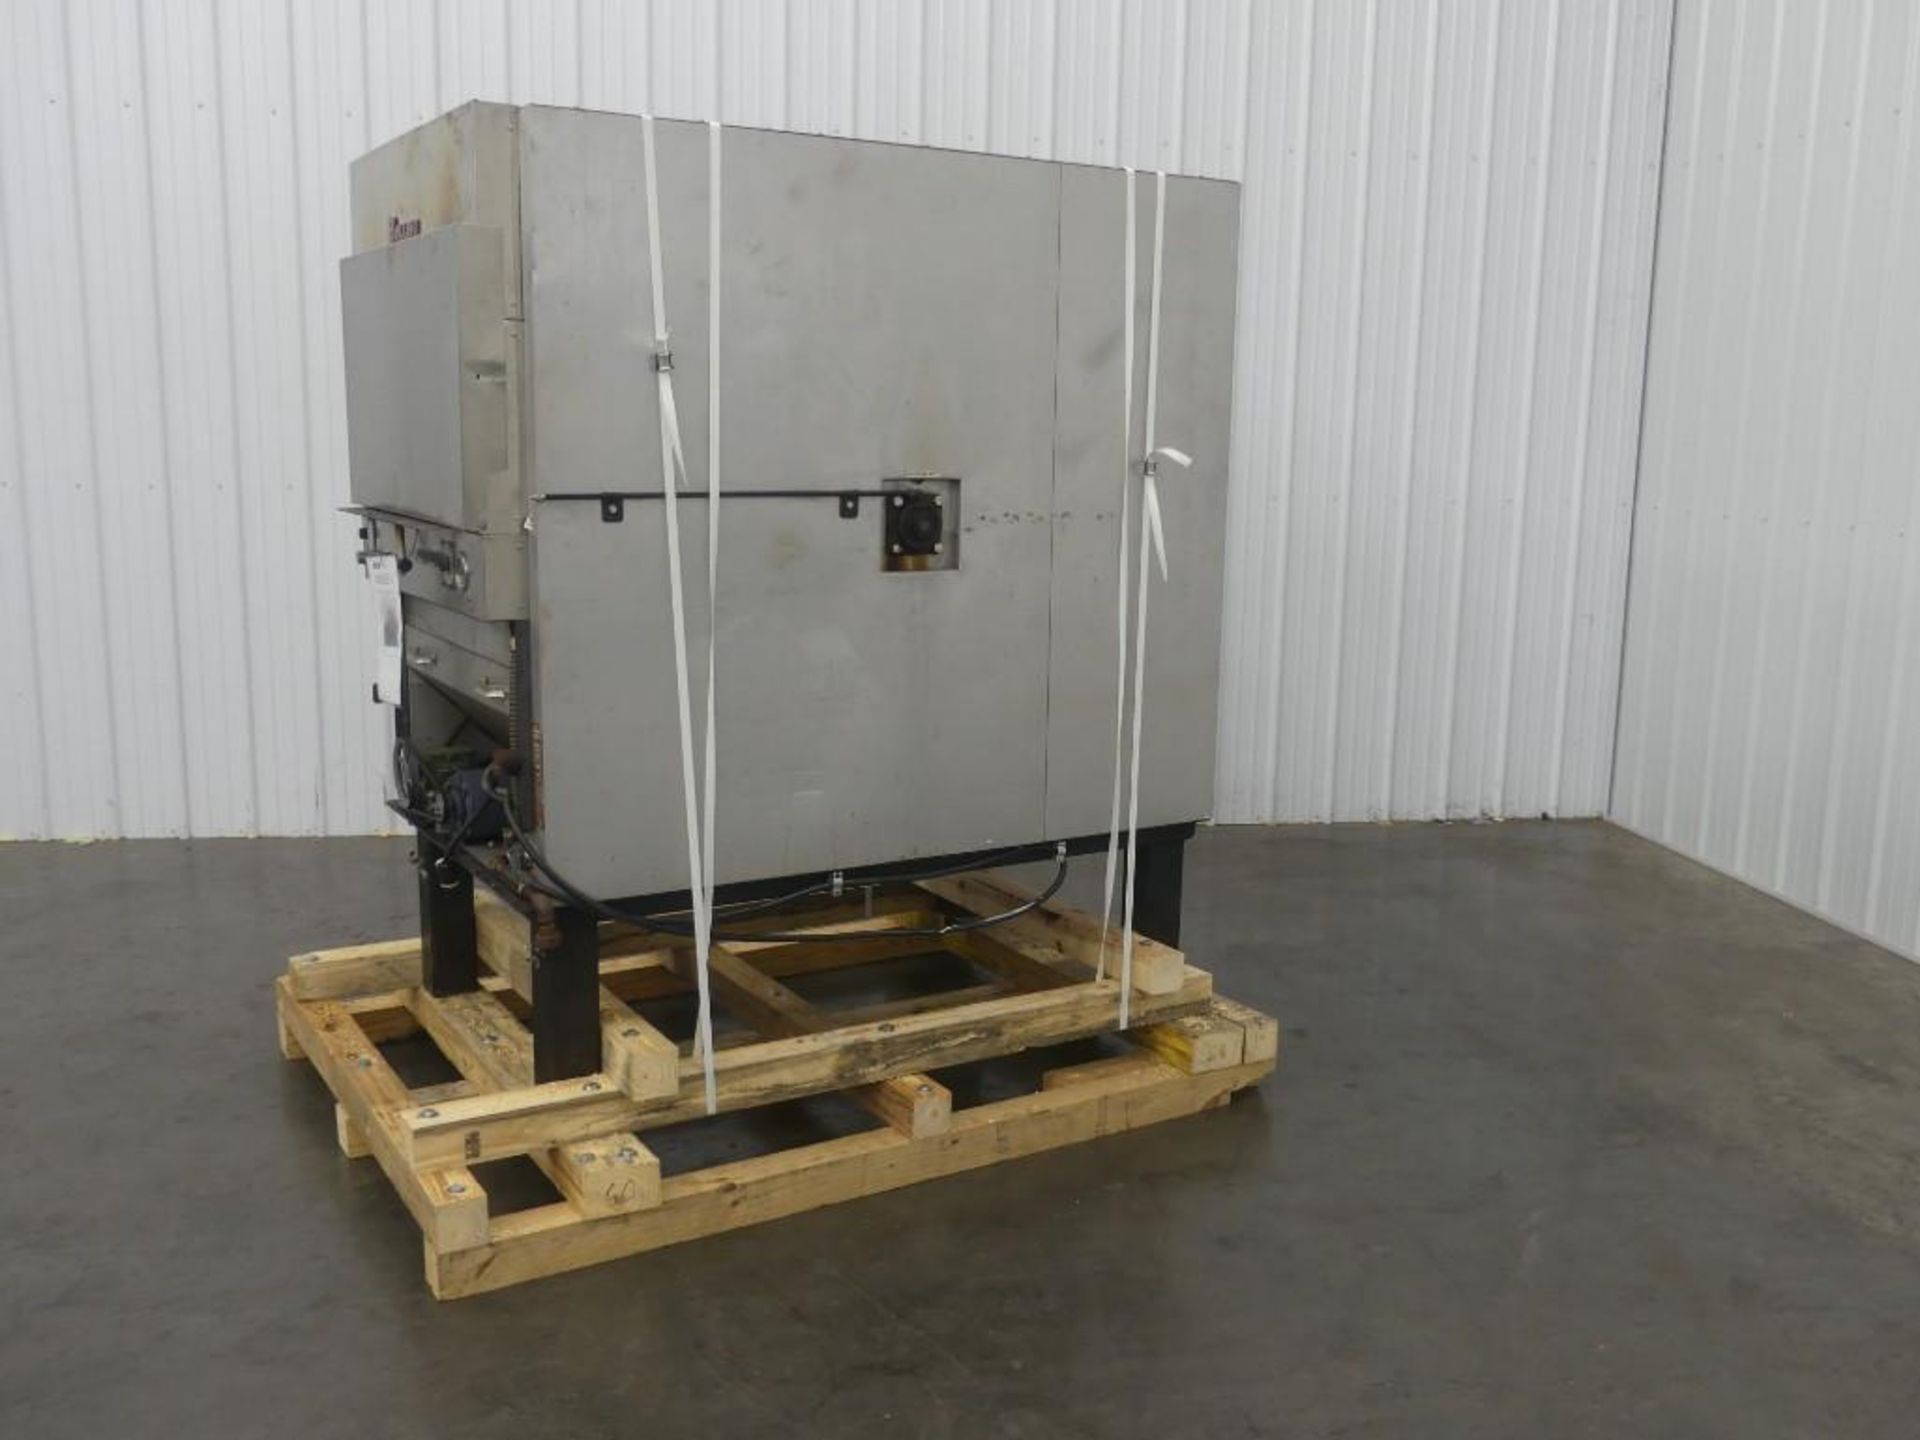 Bolling 500 M 5 Tray Revolving Rack SS Oven - Image 11 of 11